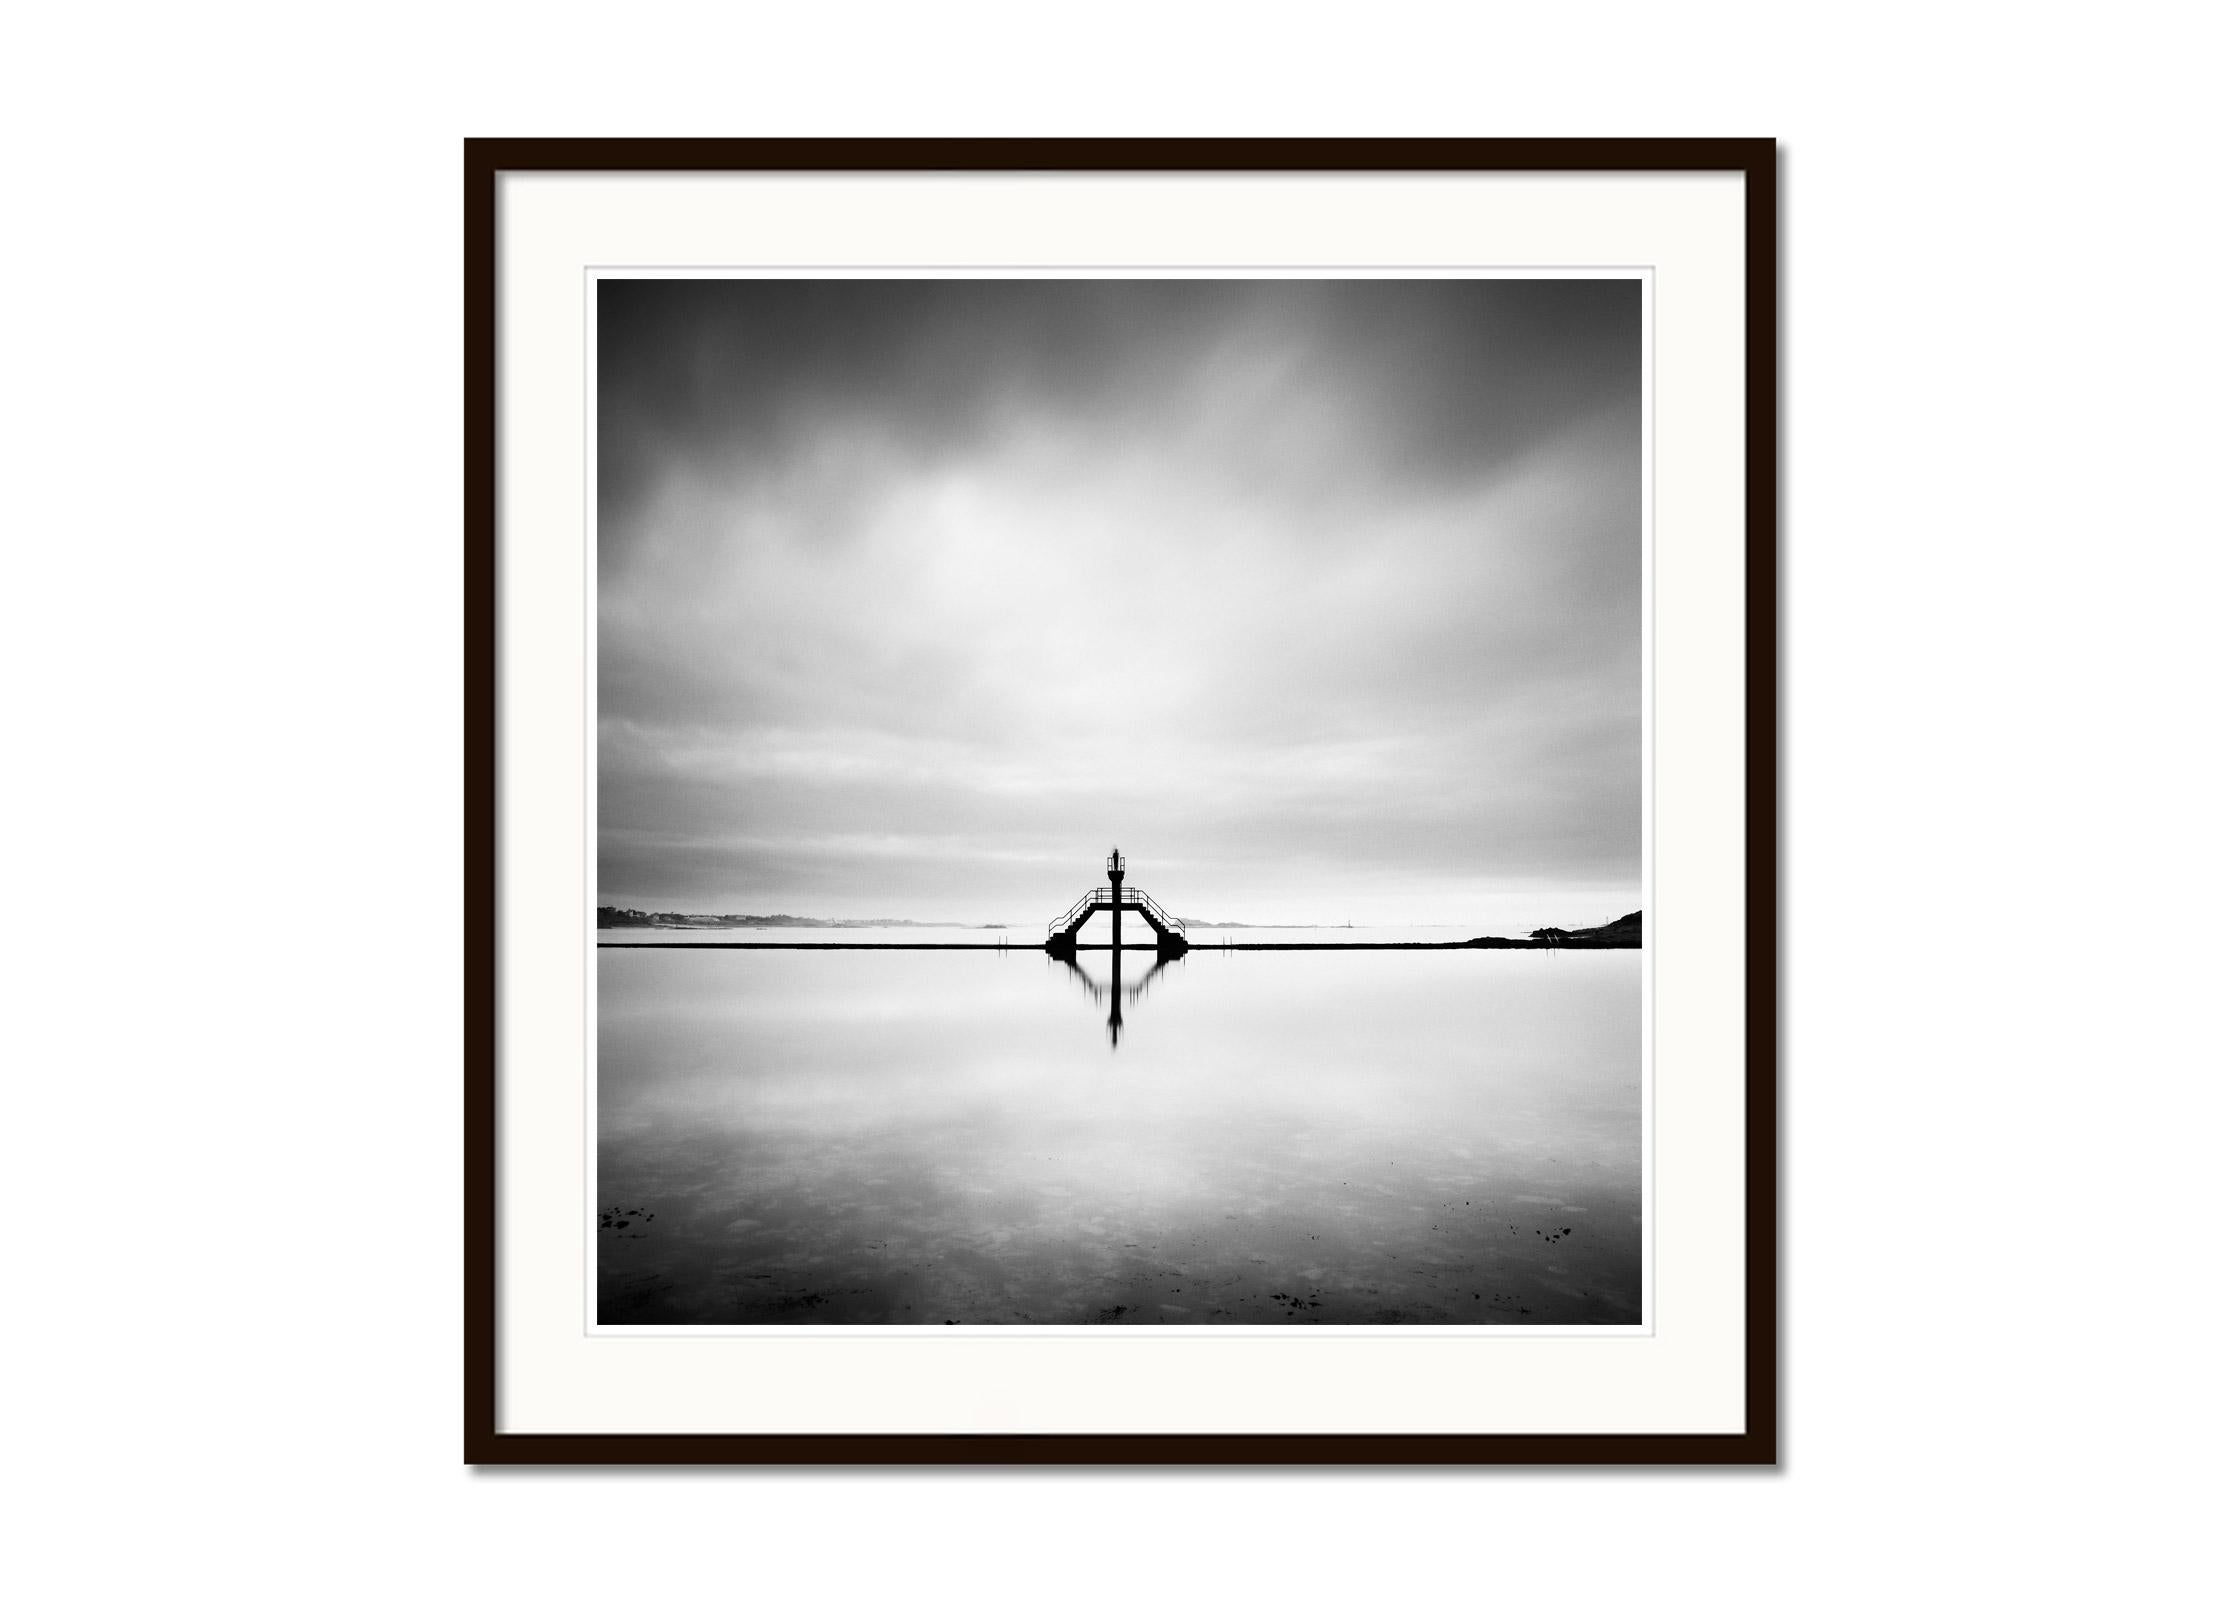 Diving Platform, Swimming Pool, black and white fine art photography, landscape - Contemporary Photograph by Gerald Berghammer